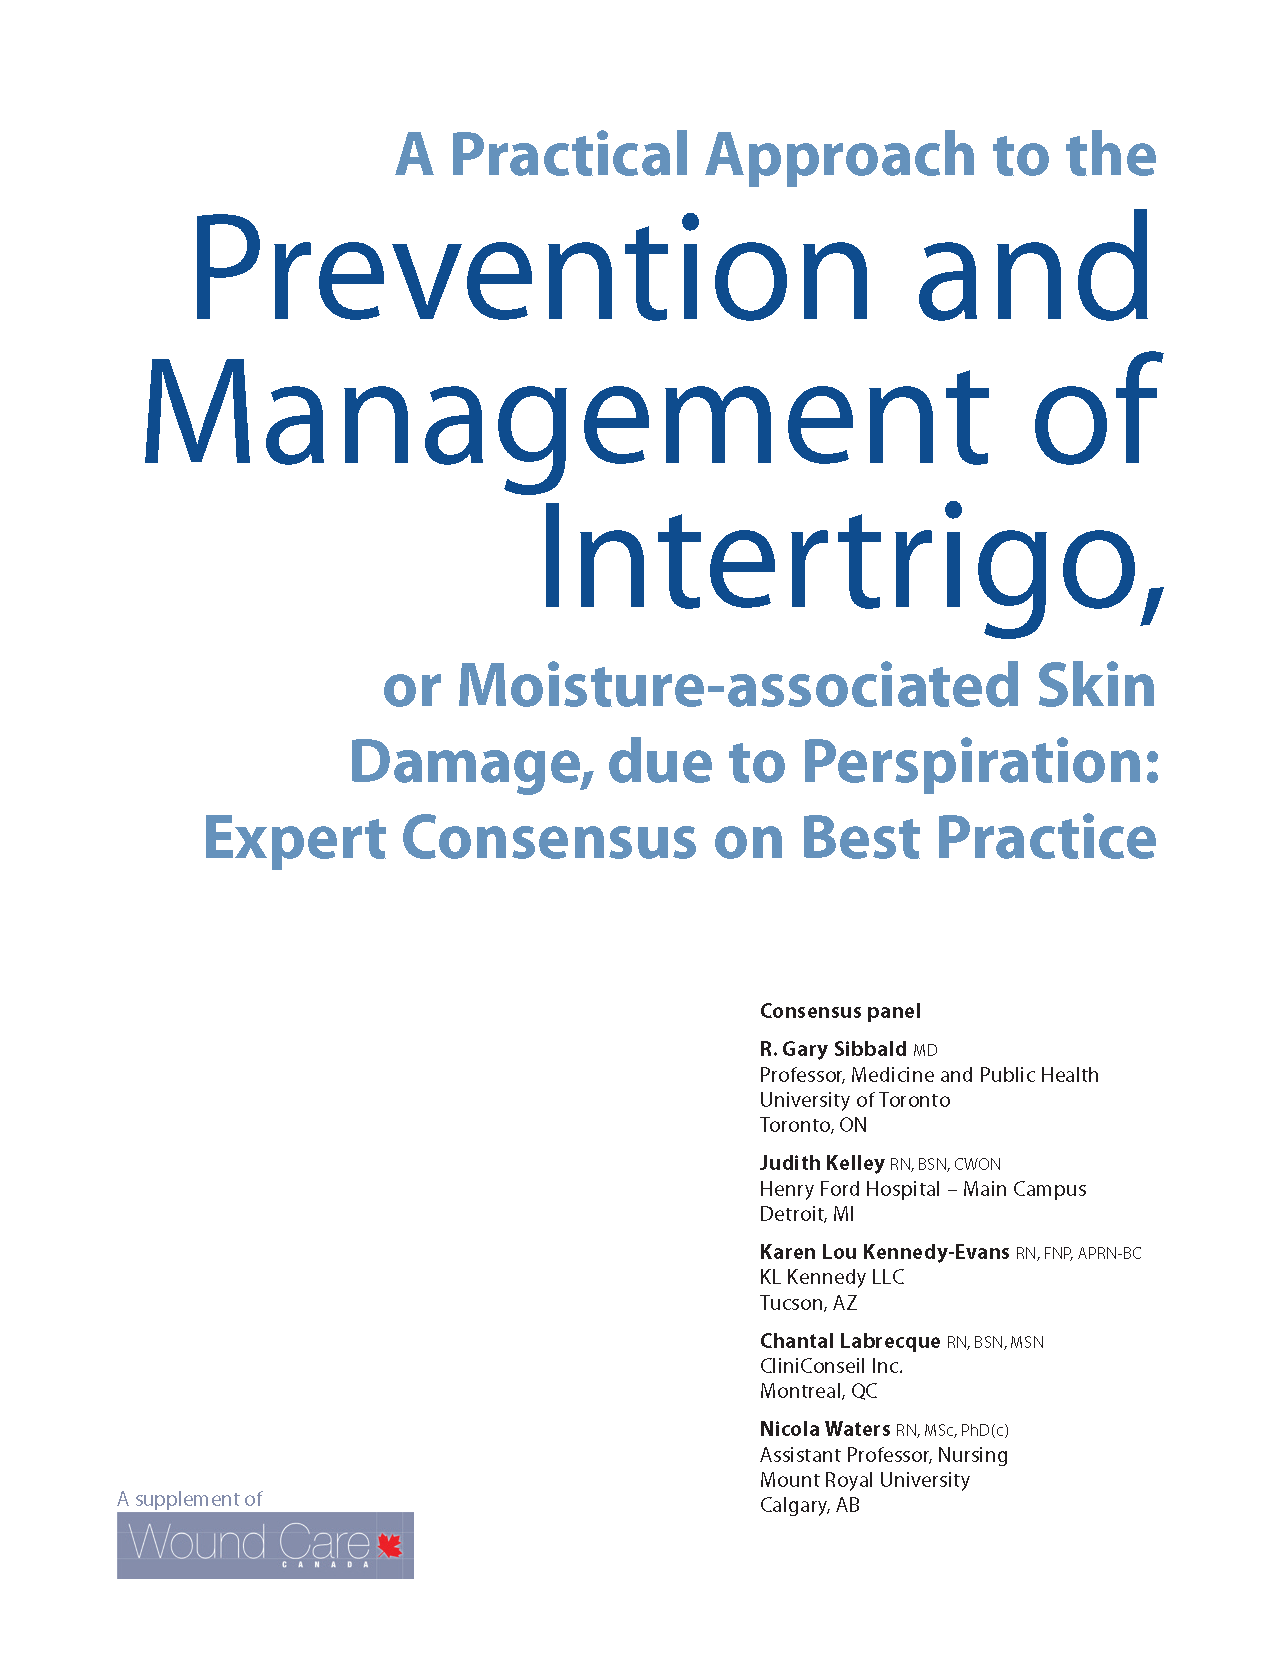 A Practical Approach to the Prevention and Management of Intertrigo